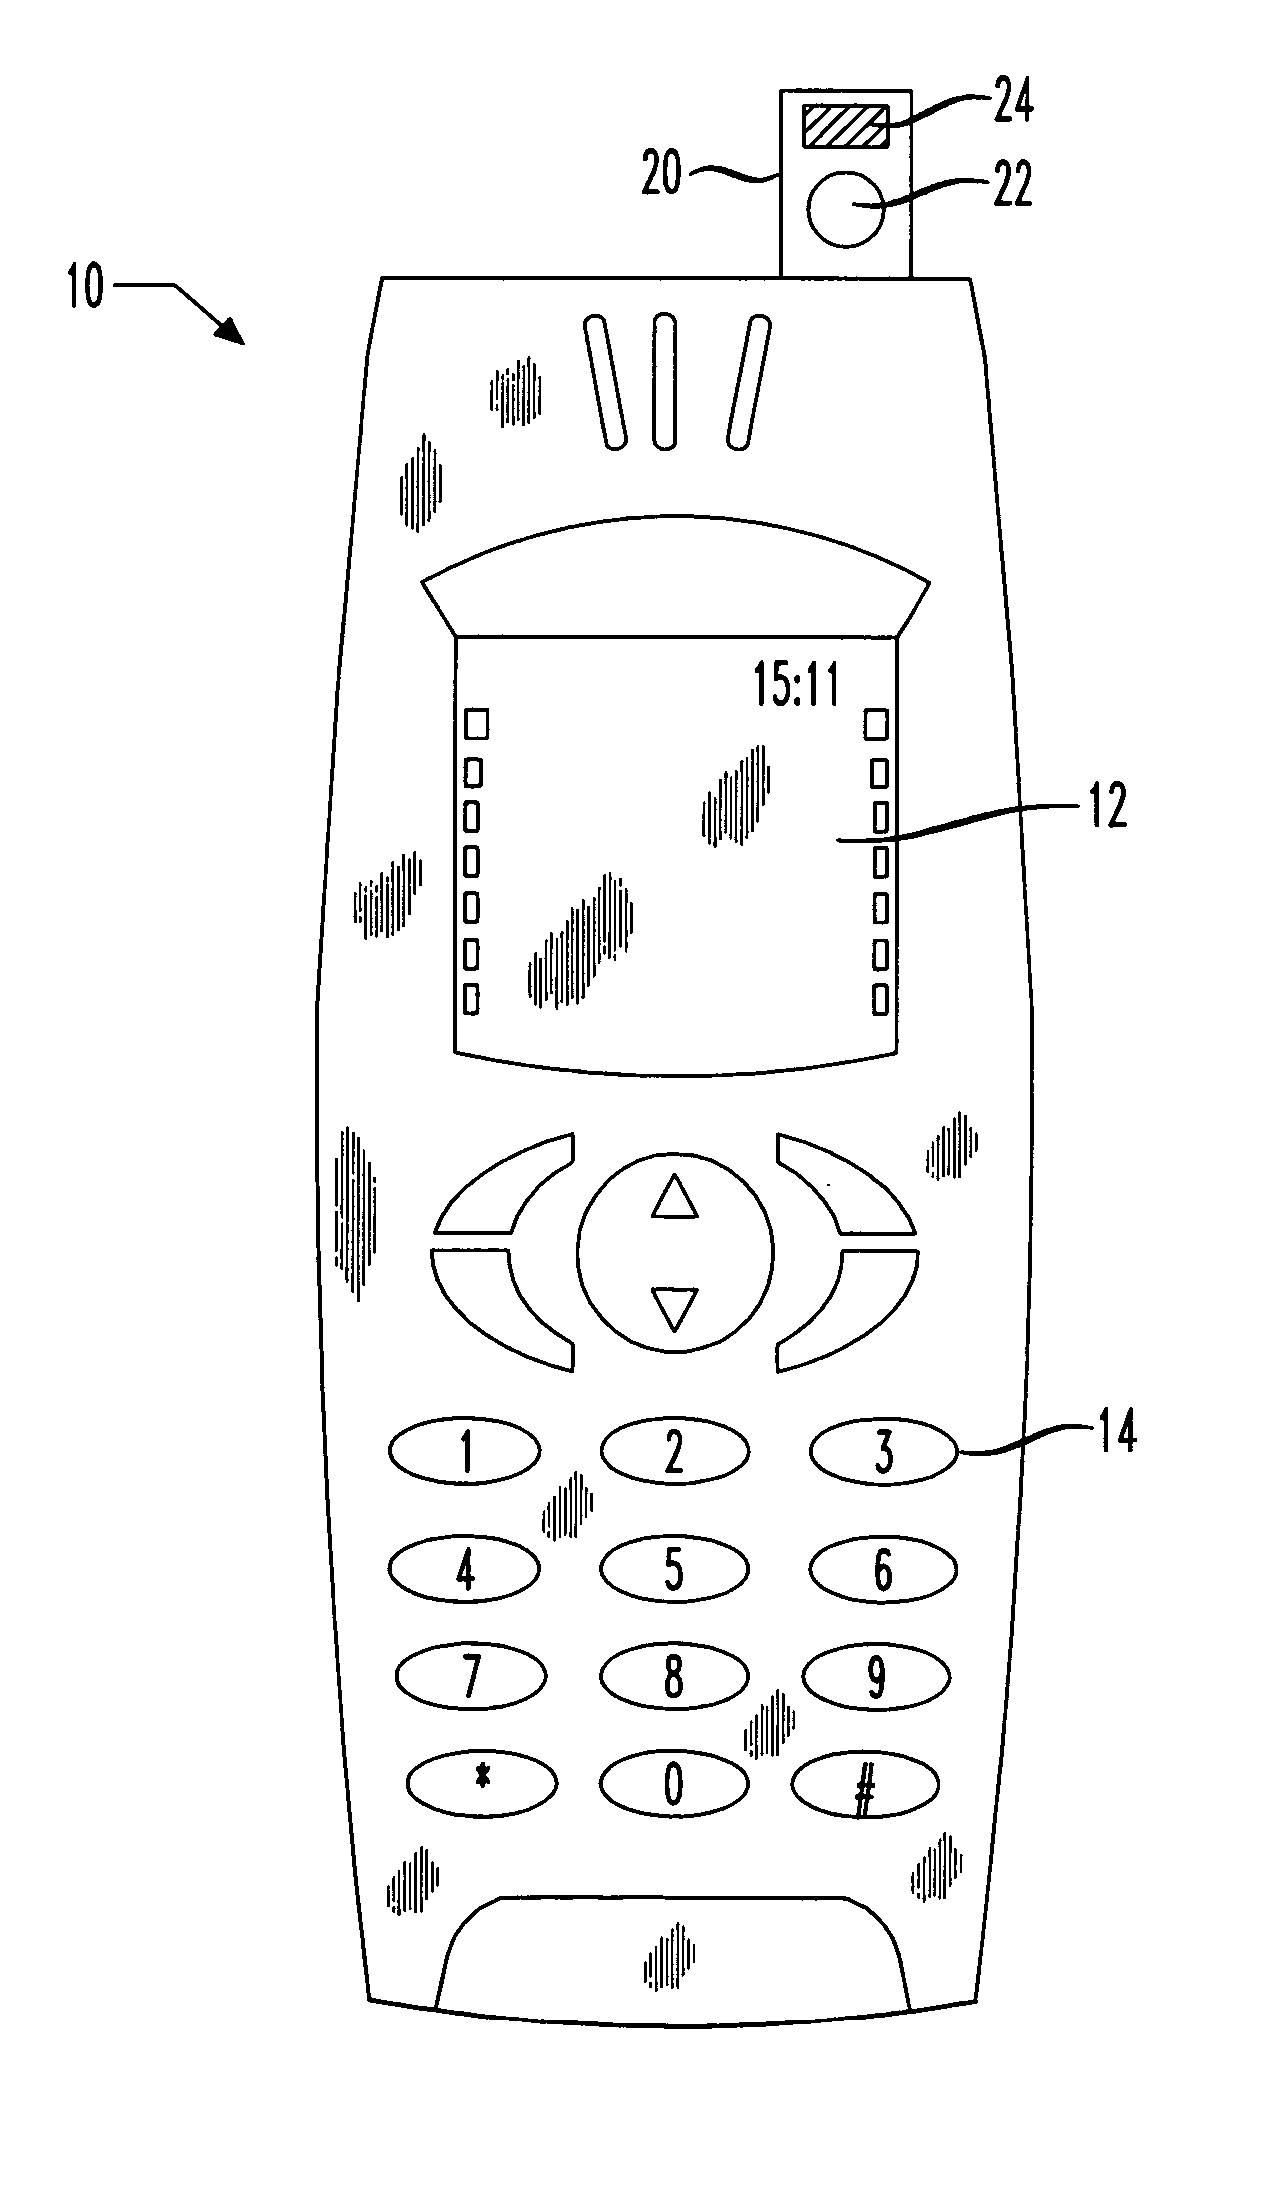 Method of using mobile communications devices for monitoring purposes and a system for implementation thereof